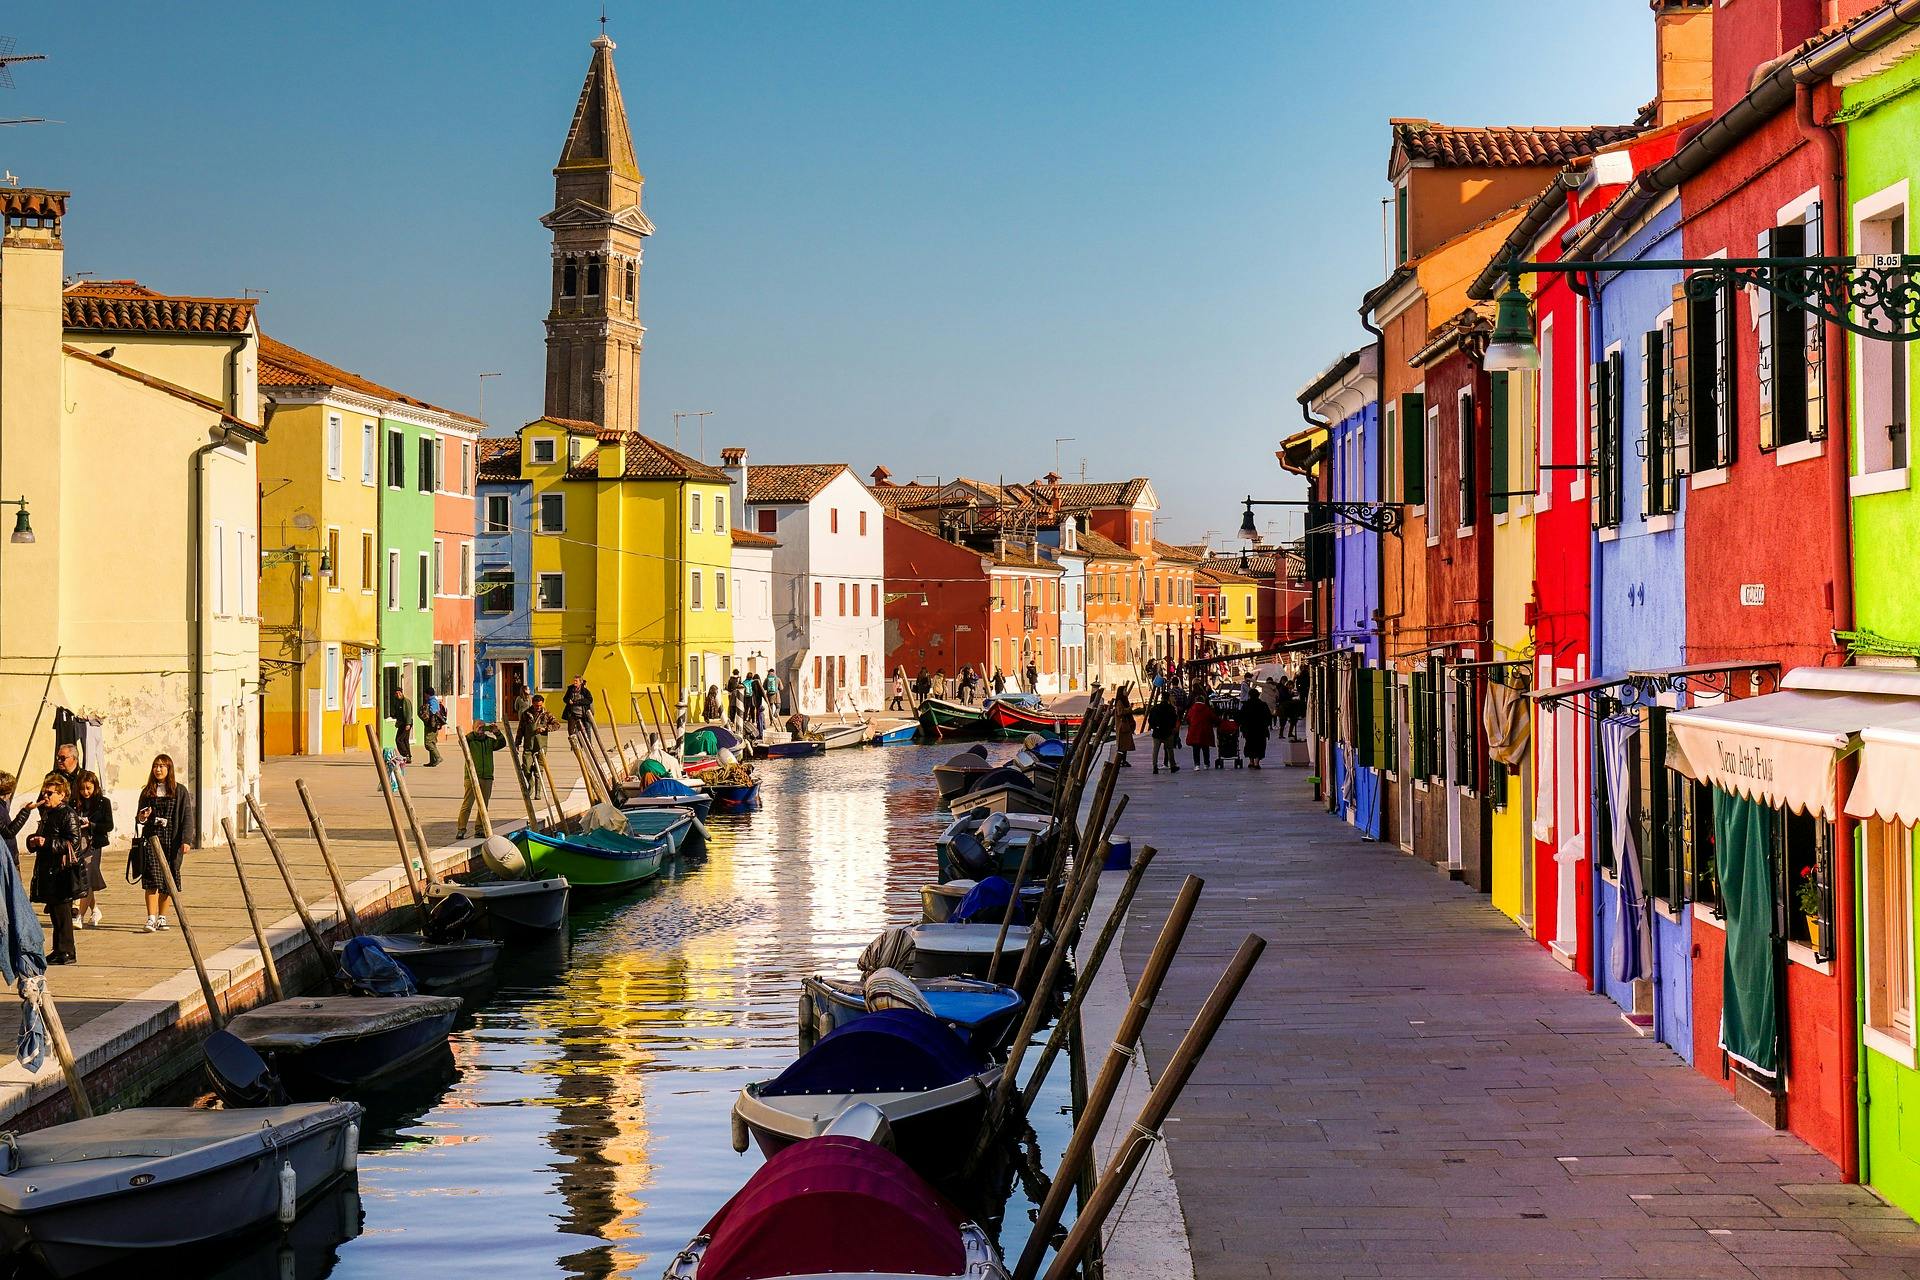 Six-hour lagoon tour in Murano, Burano and Torcello